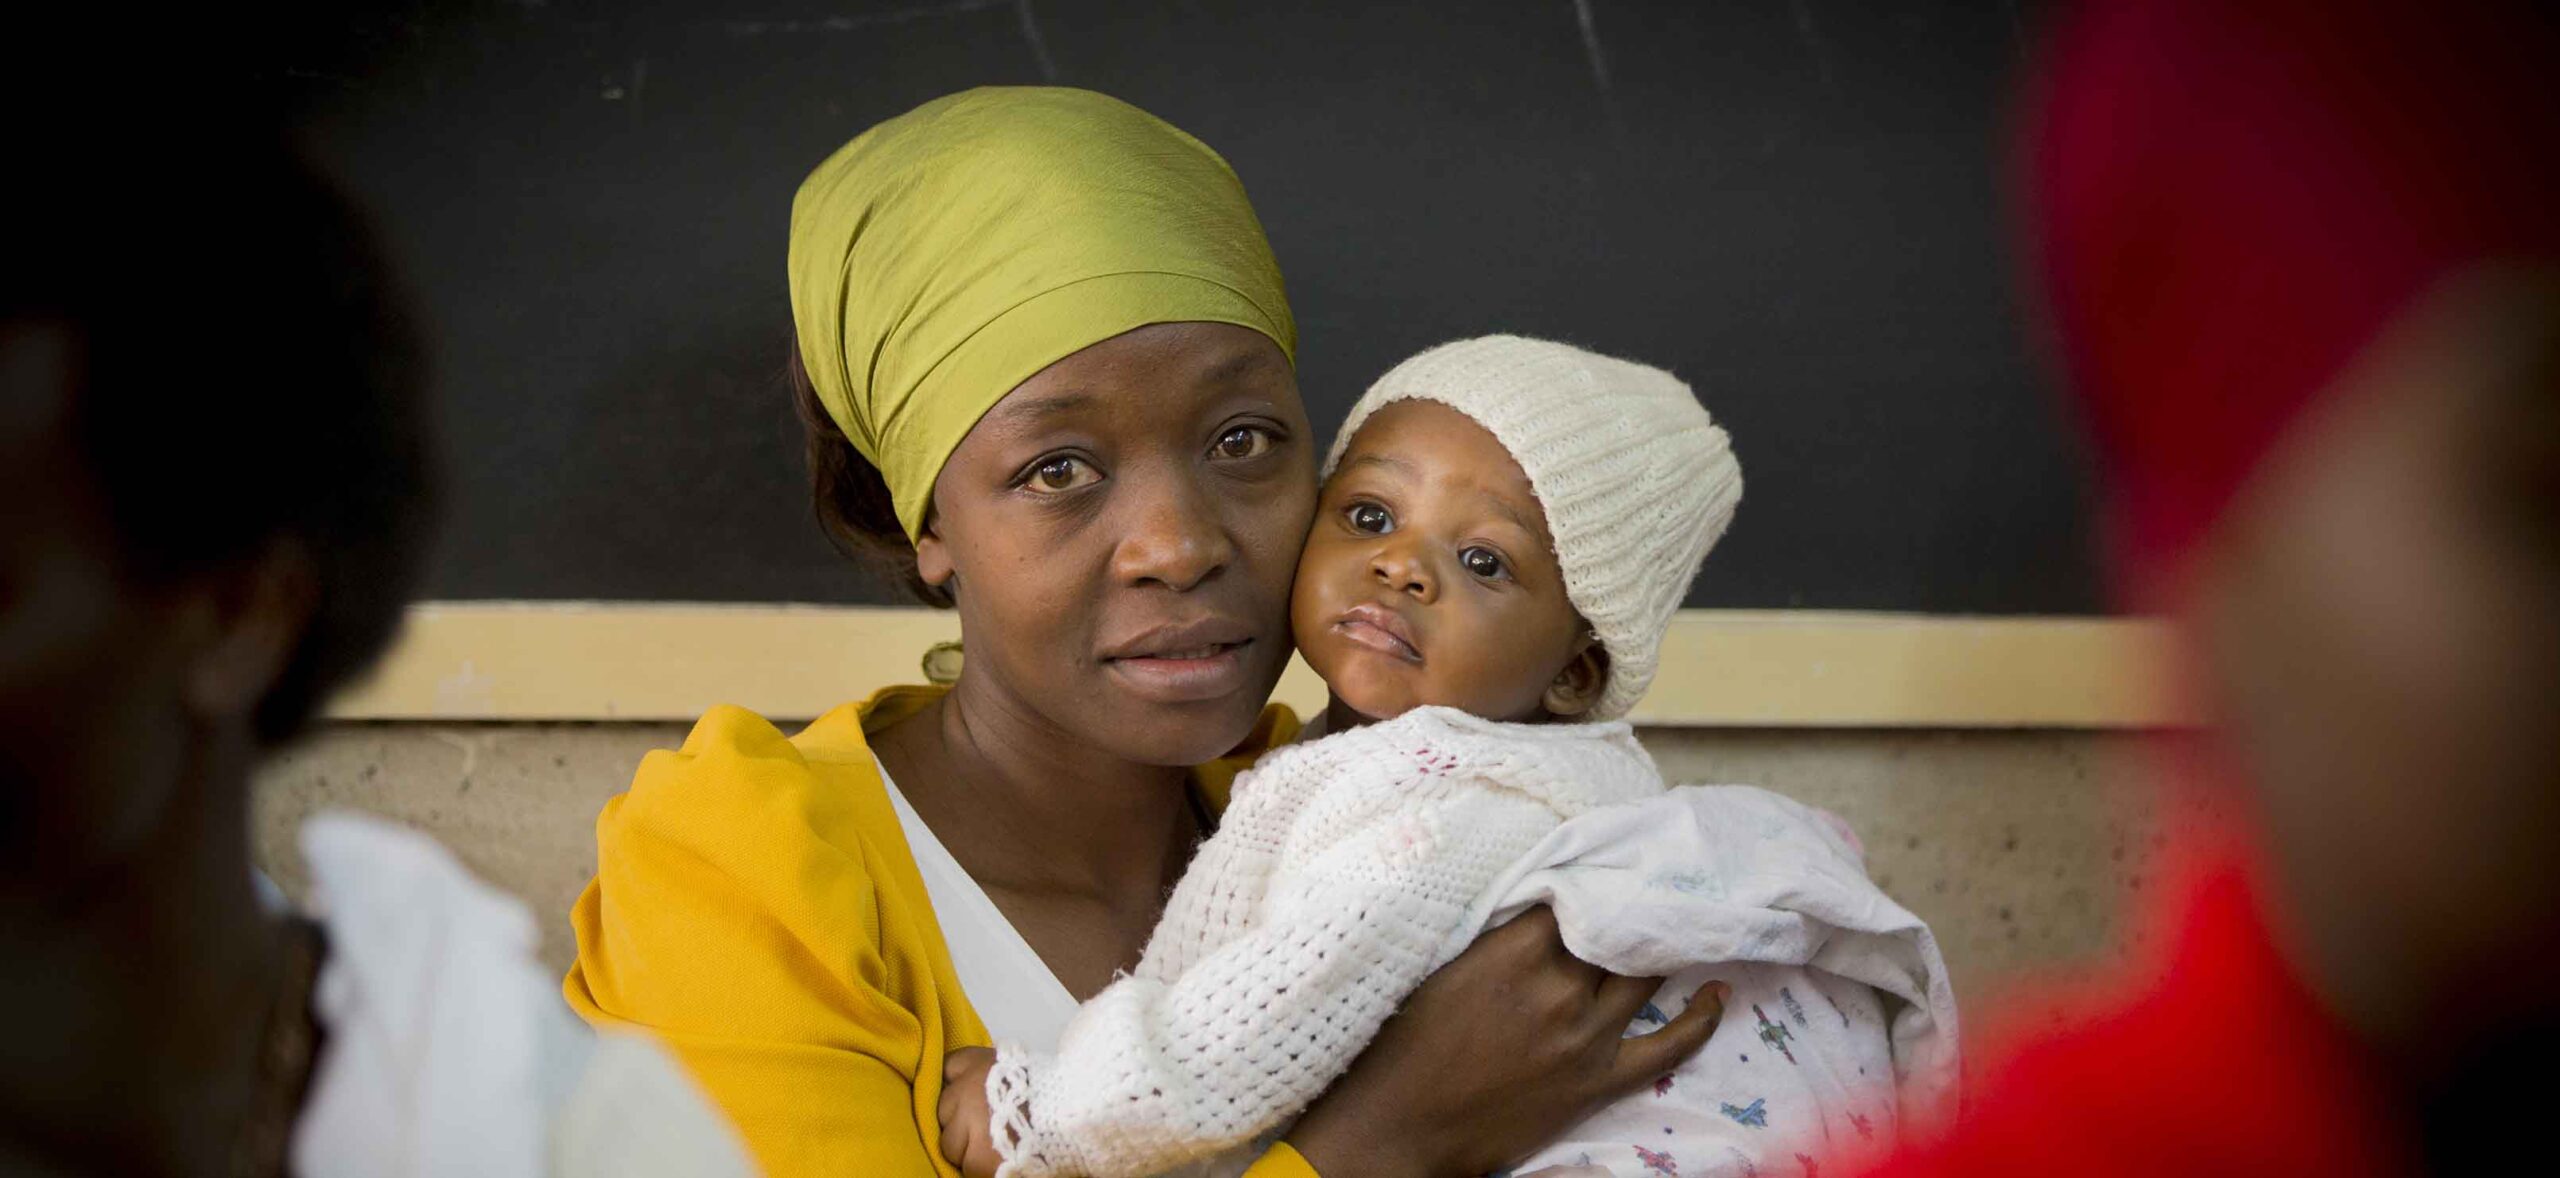 ACHAP Wins New Award to Reduce Maternal and Child Deaths in Kenya and Uganda under USAID’s New Partners Initiative